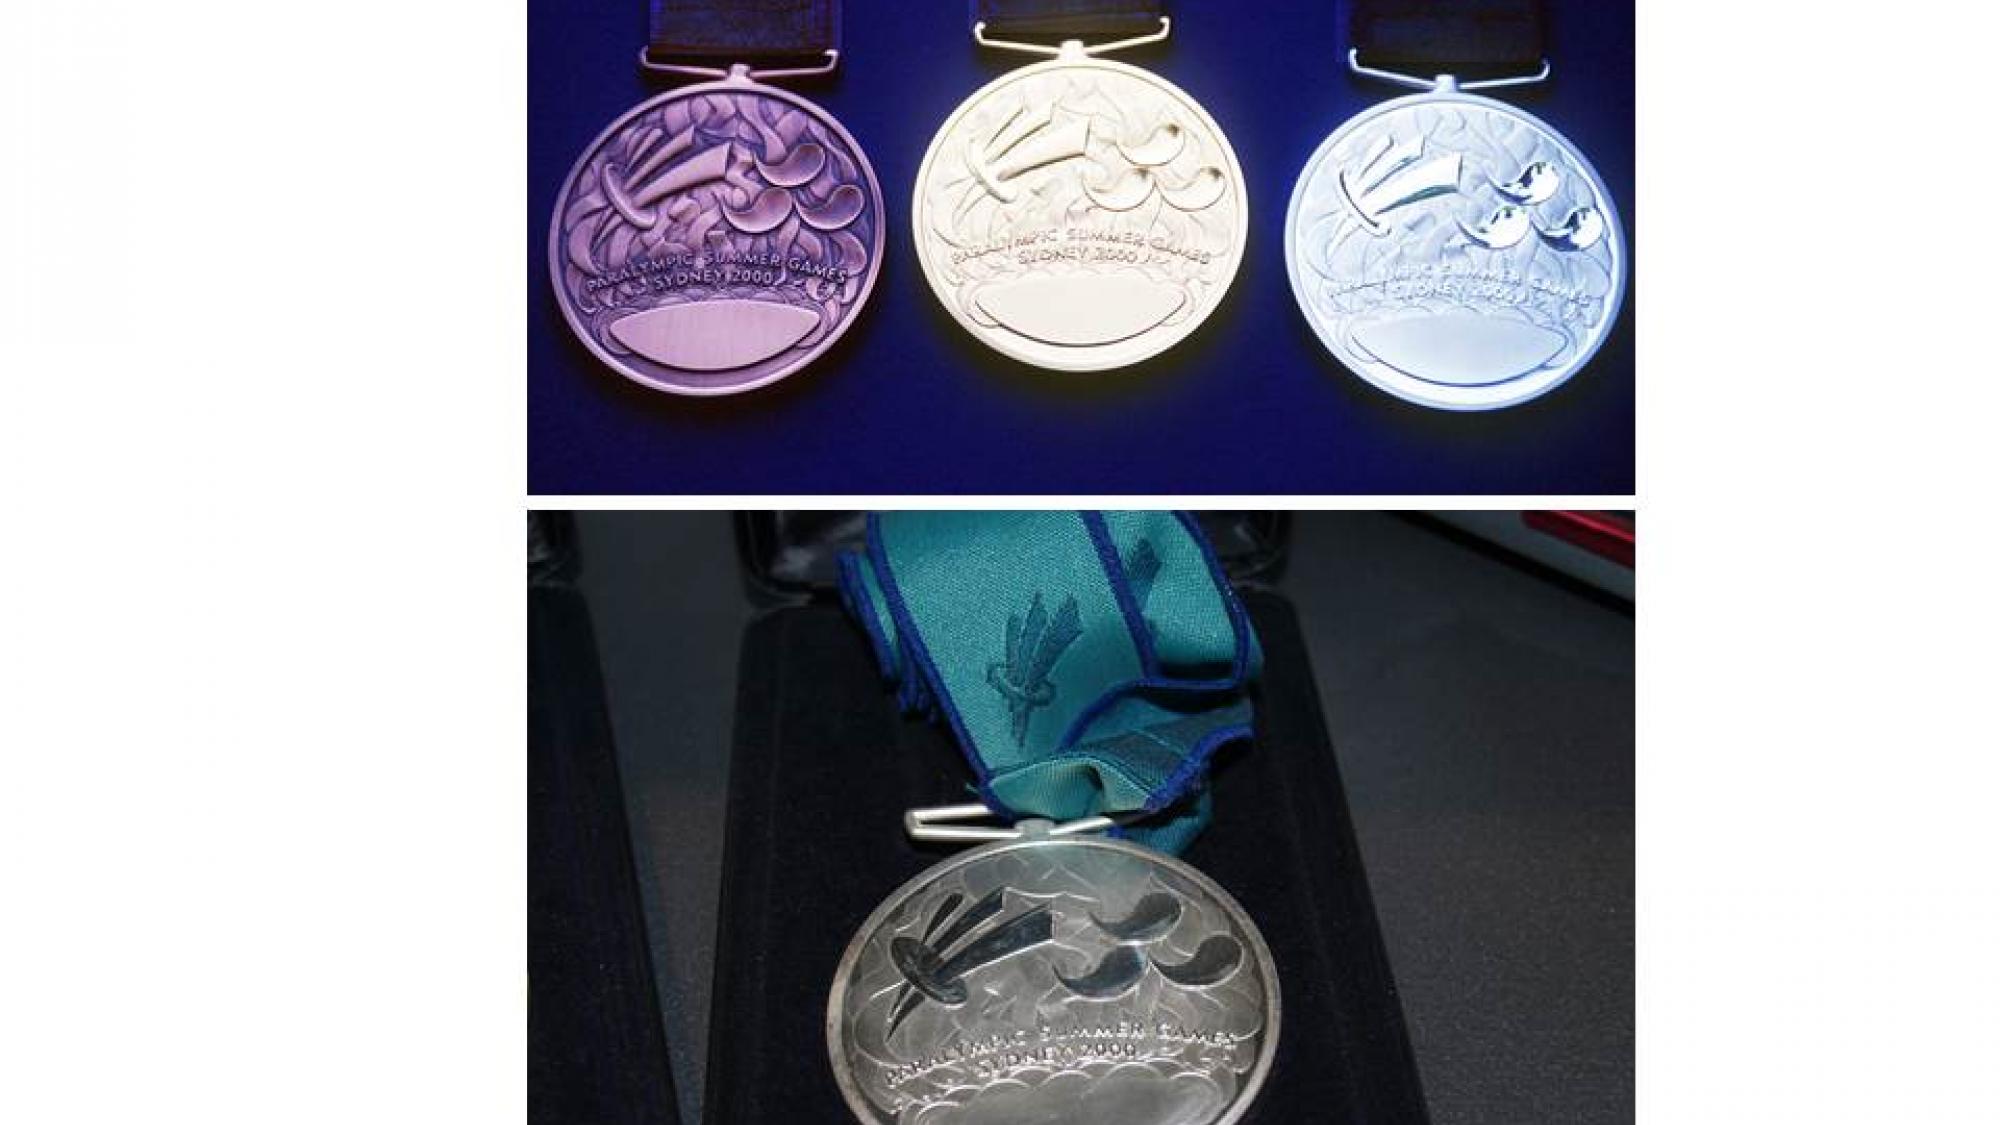 The medals of the Sydney 2000 Paralympic Games